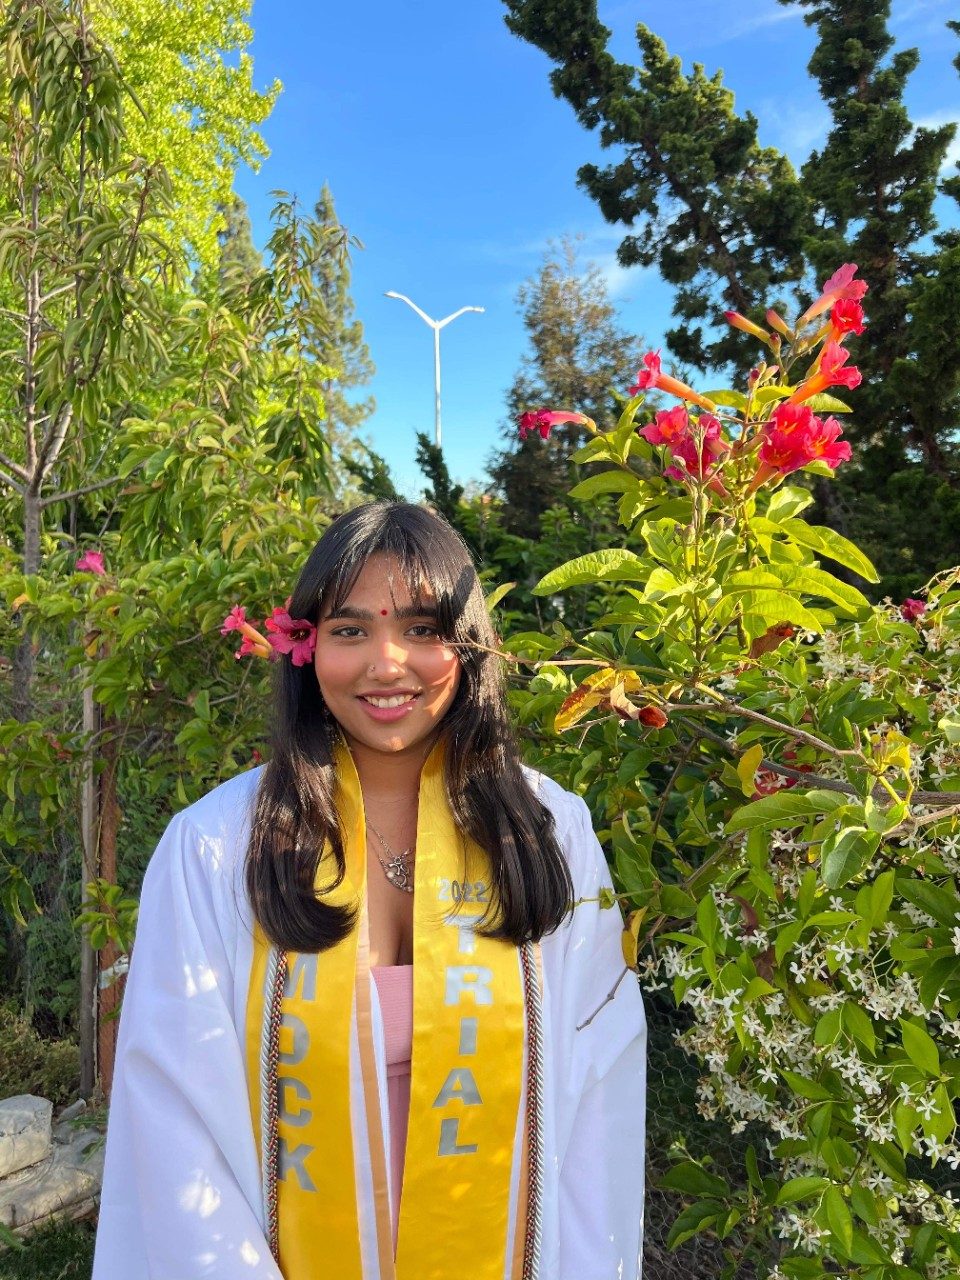 Photo of Devanshi in a white graduation gown with yellow sash against beautiful trees and flowers. Link to submission.